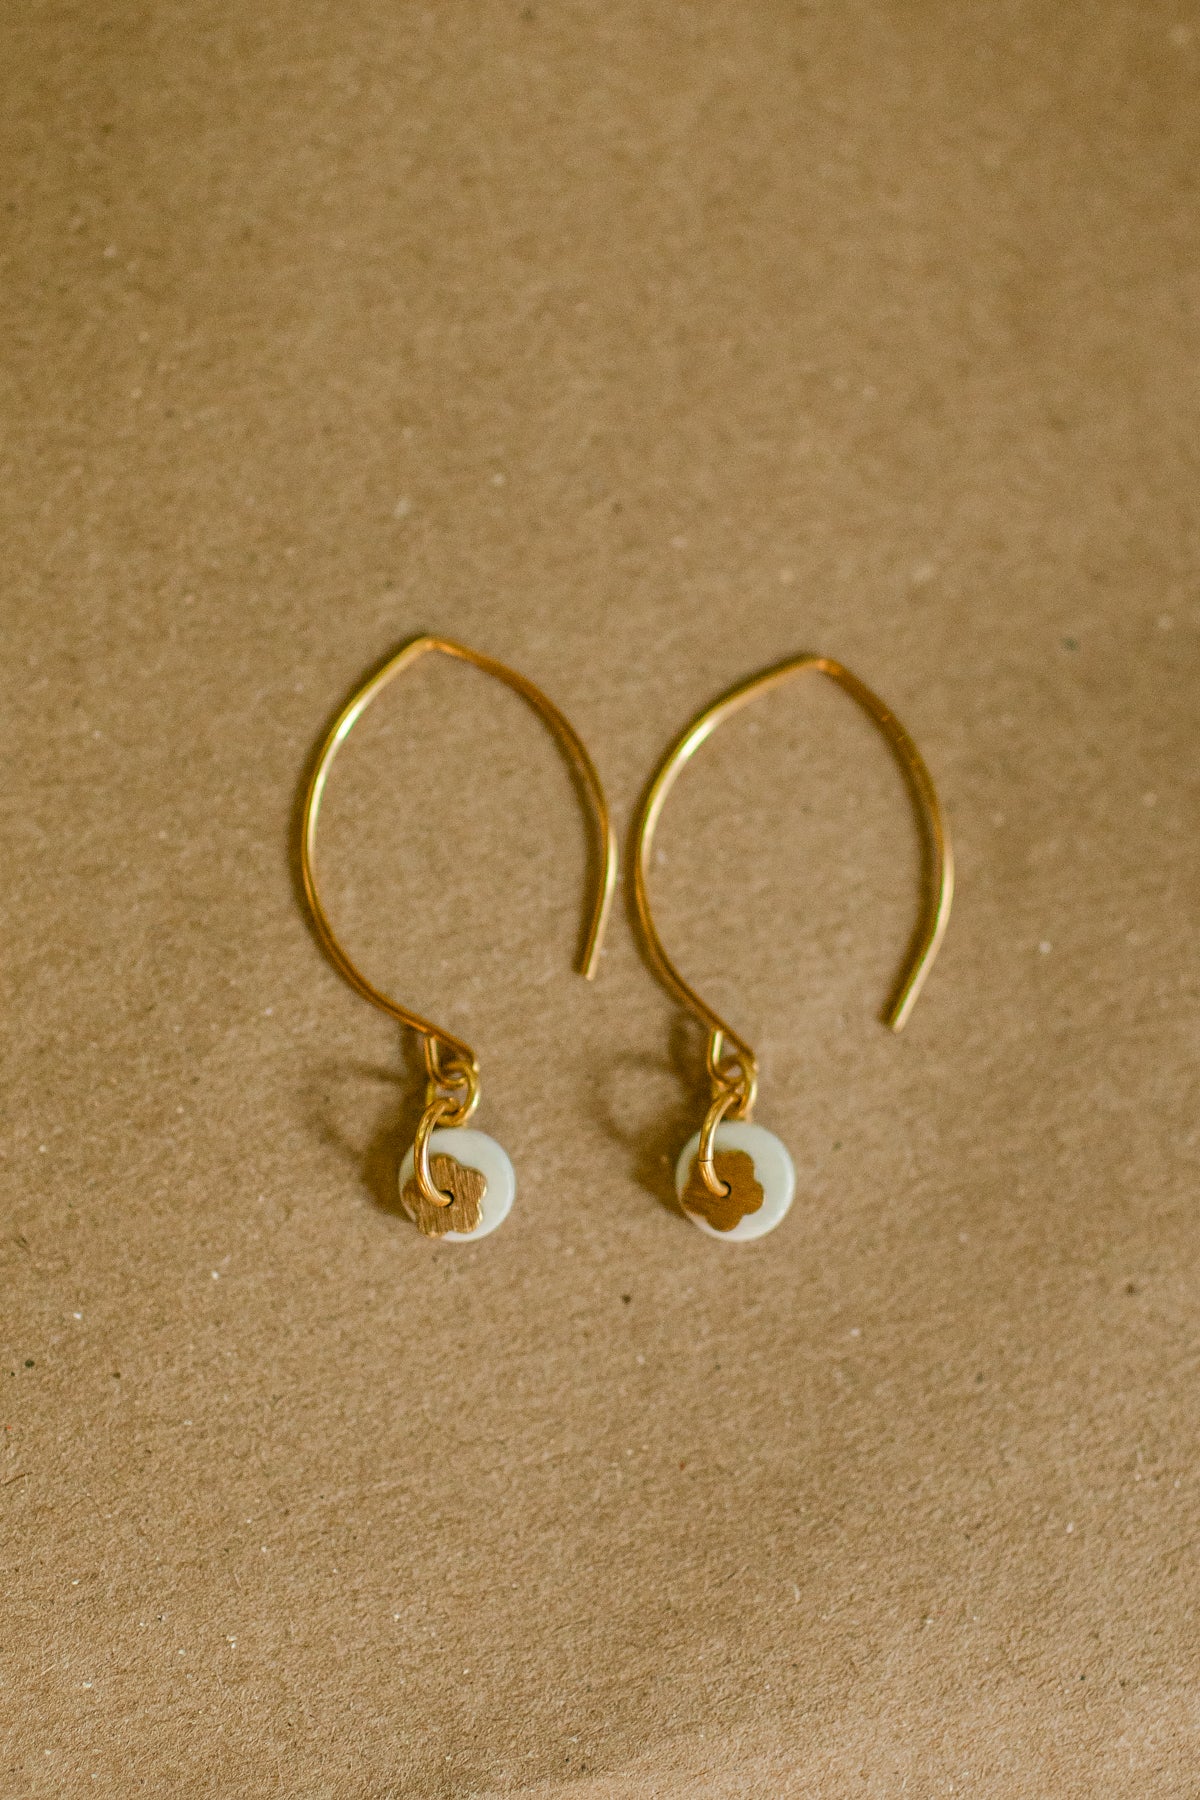 Floral earrings on 14kt gold and sterling wires in blue or cream